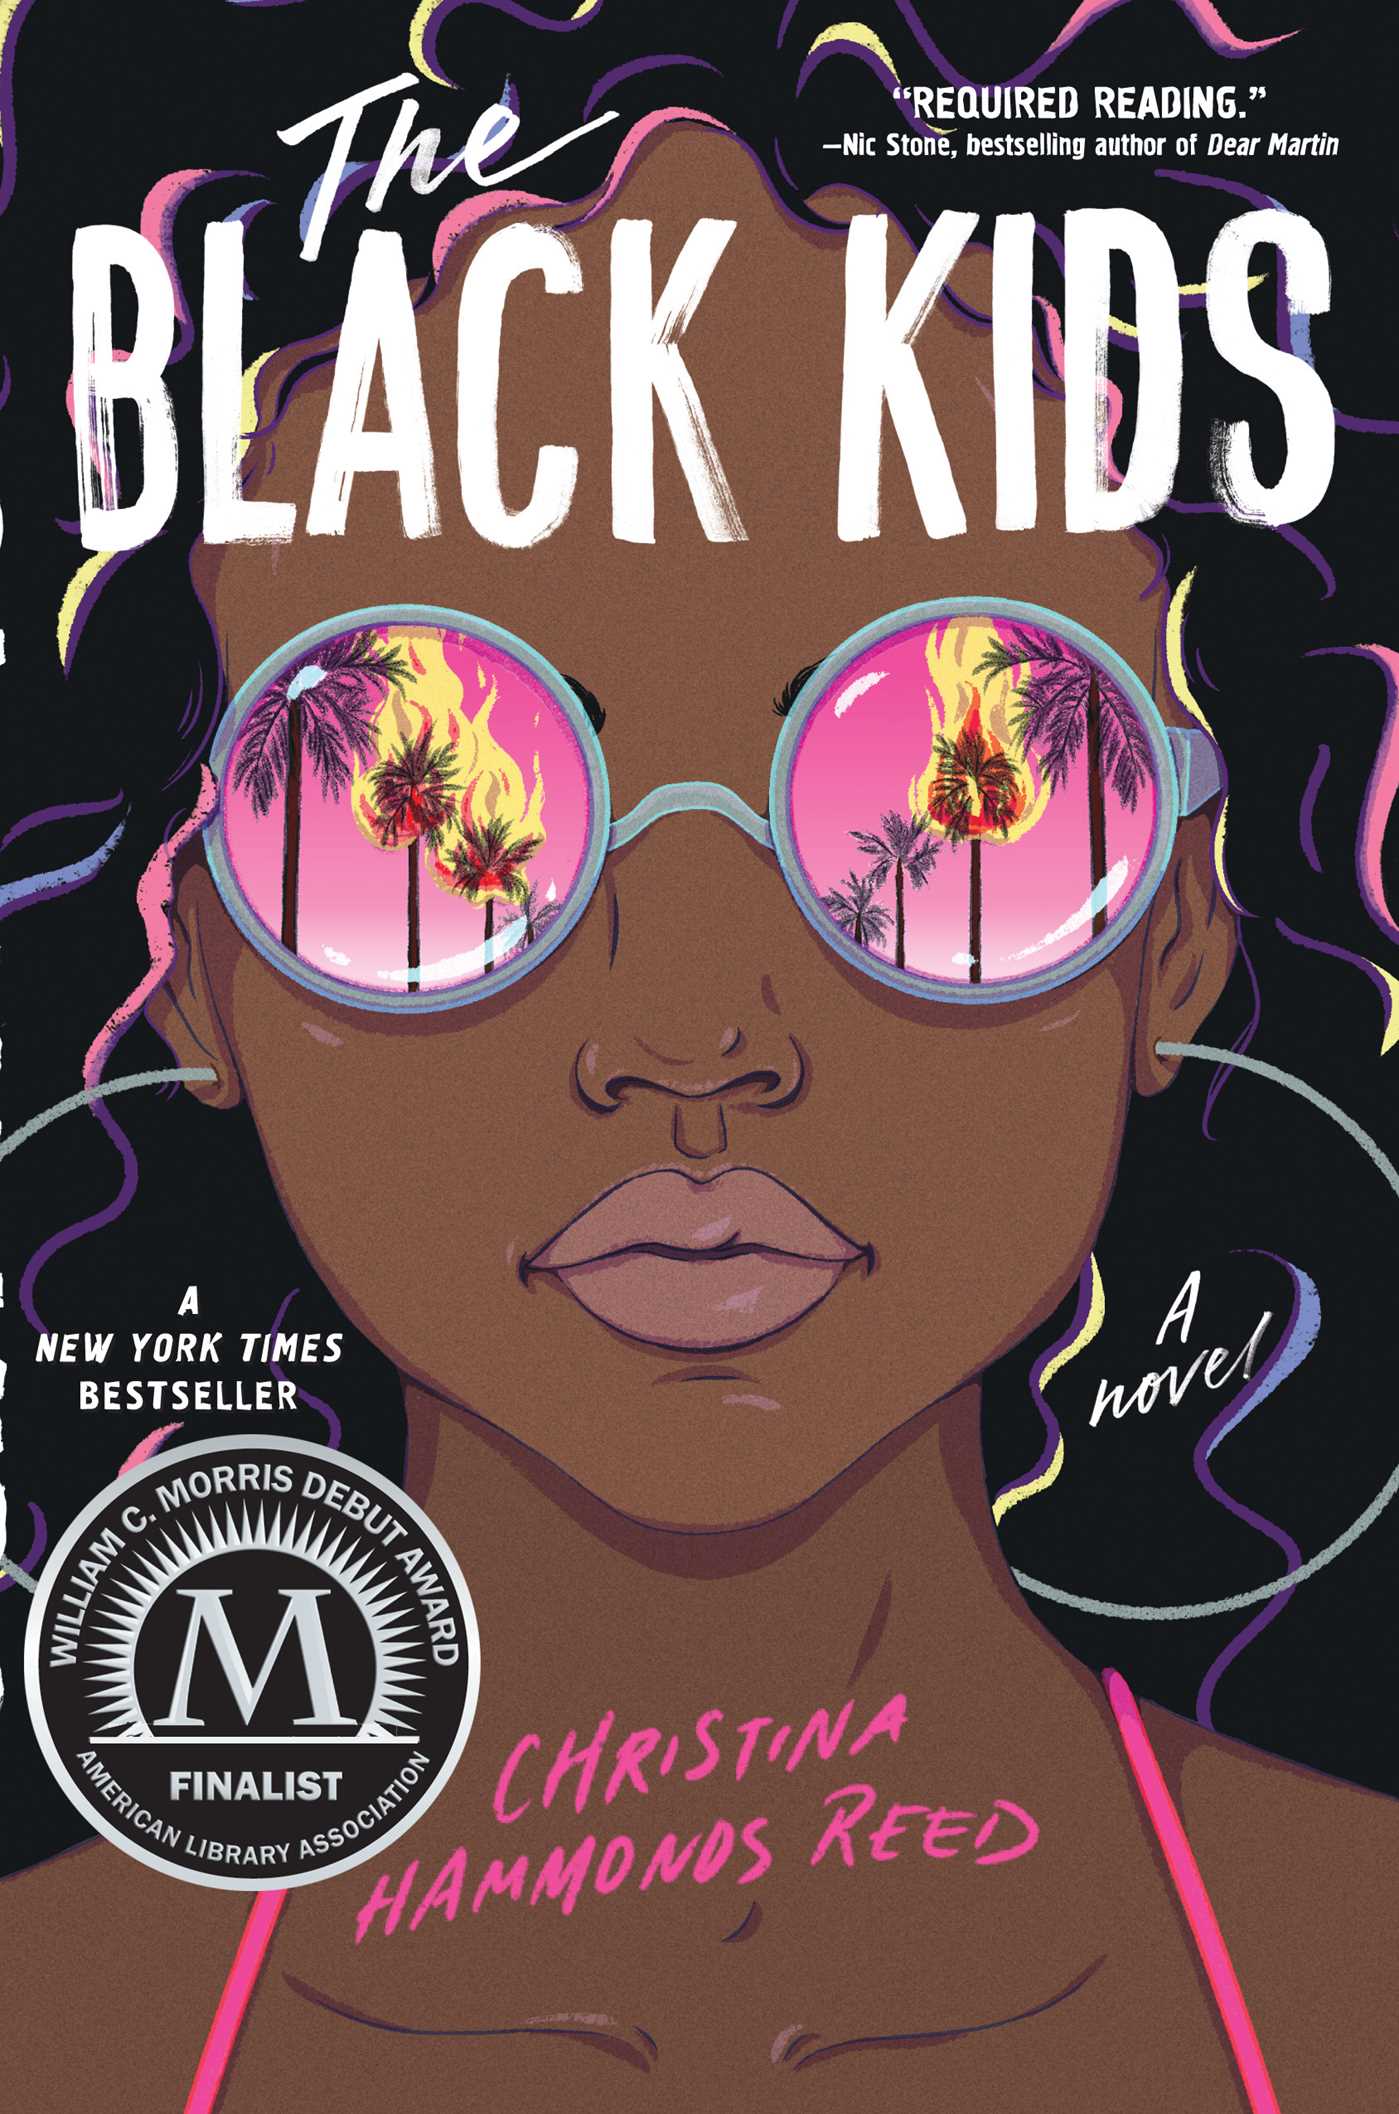 Cover illustration for "The Black Kids" - a Black teen wearing large sunglasses reflecting California palm trees,